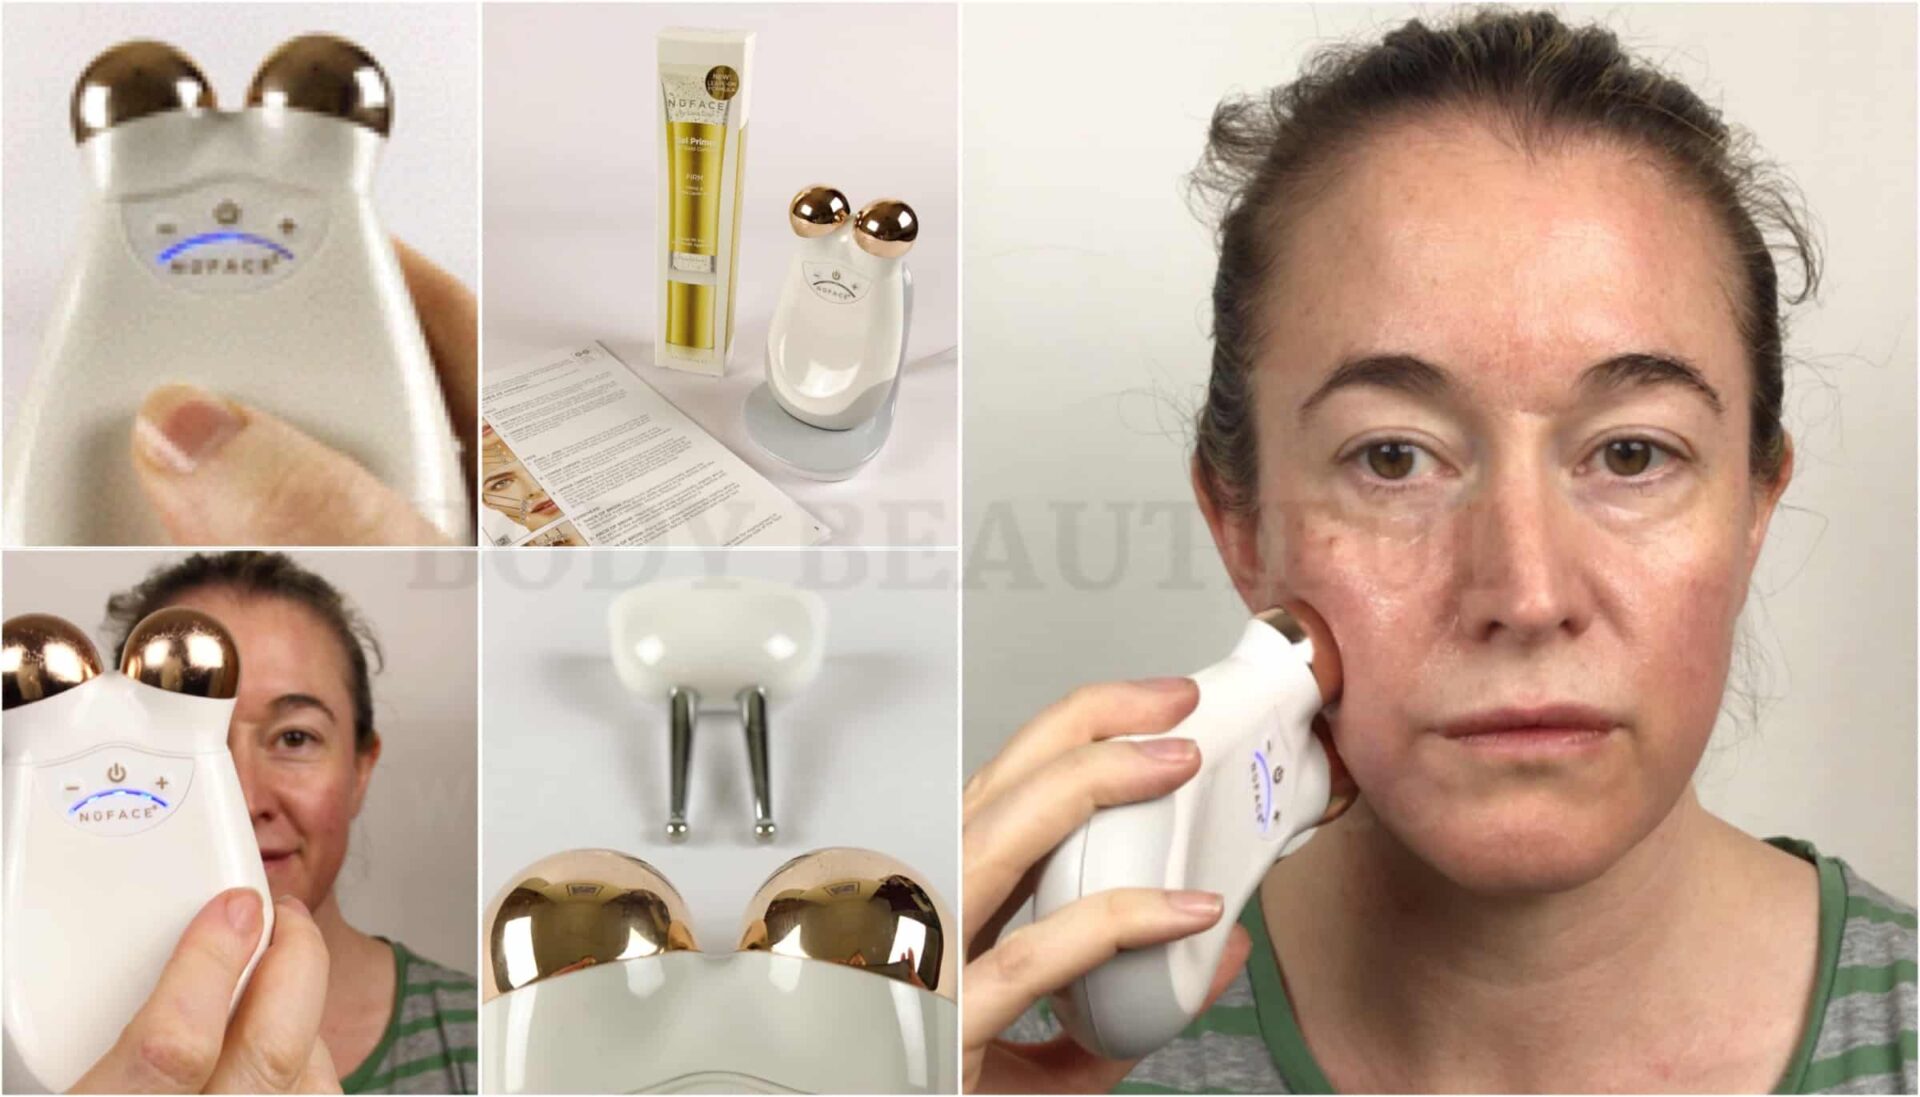 Tried & tested user trial of the Nuface Trinity microcurrent device with before & after photos by WeAreBodyBeautiful.com